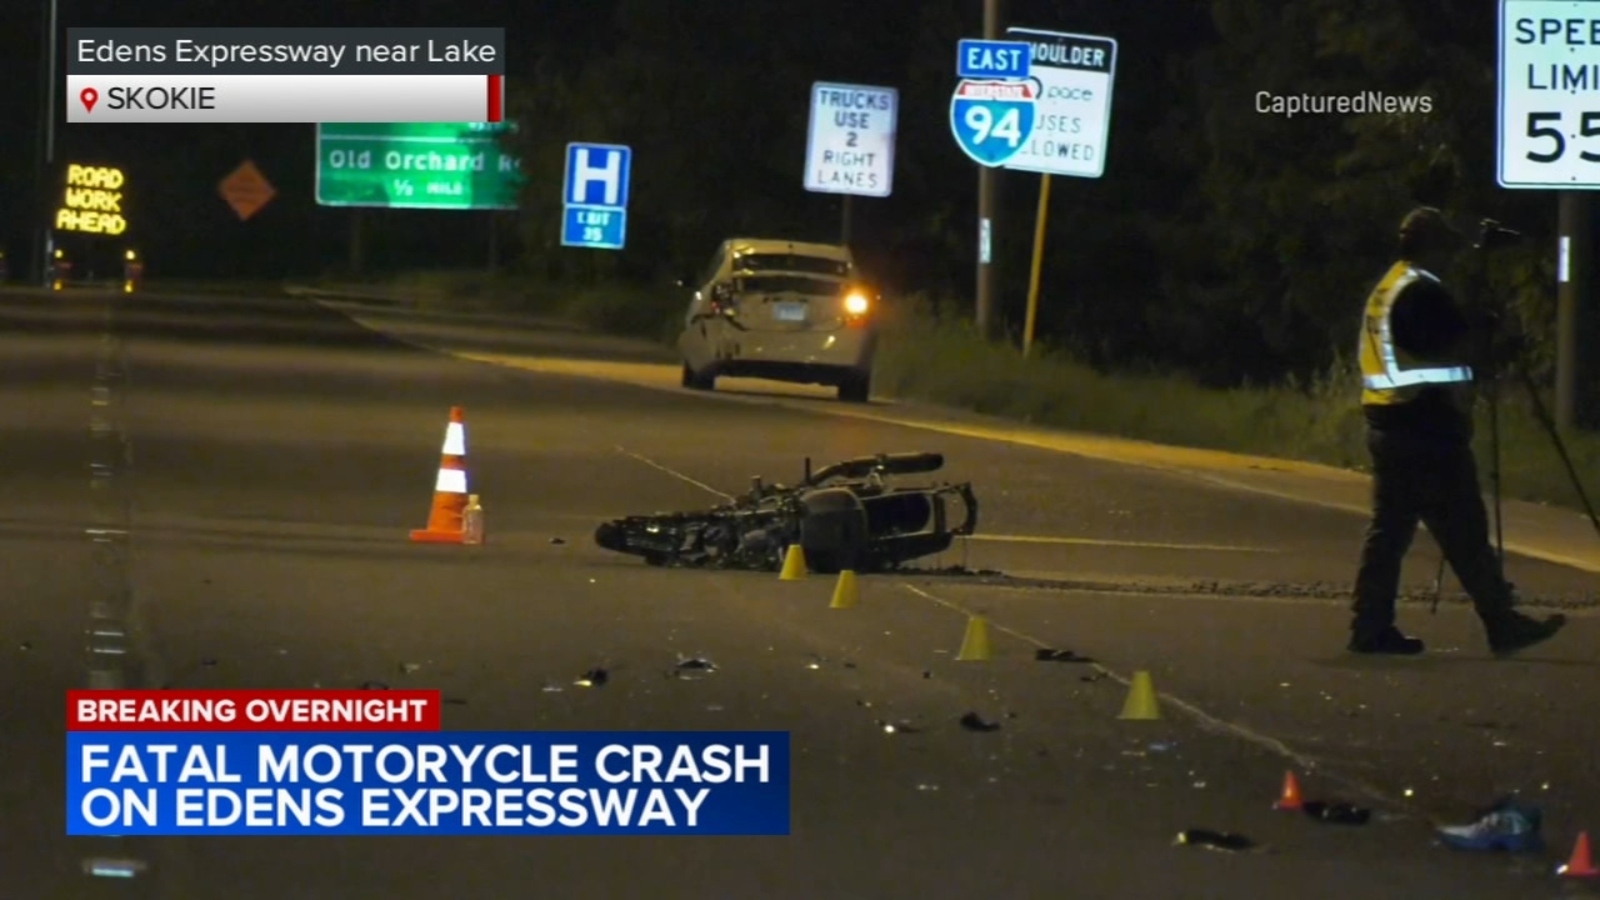 Motorcycle crash: Edens Expressway lanes reopen after deadly motorcycle crash in Skokie, Illinois State Police investigating [Video]